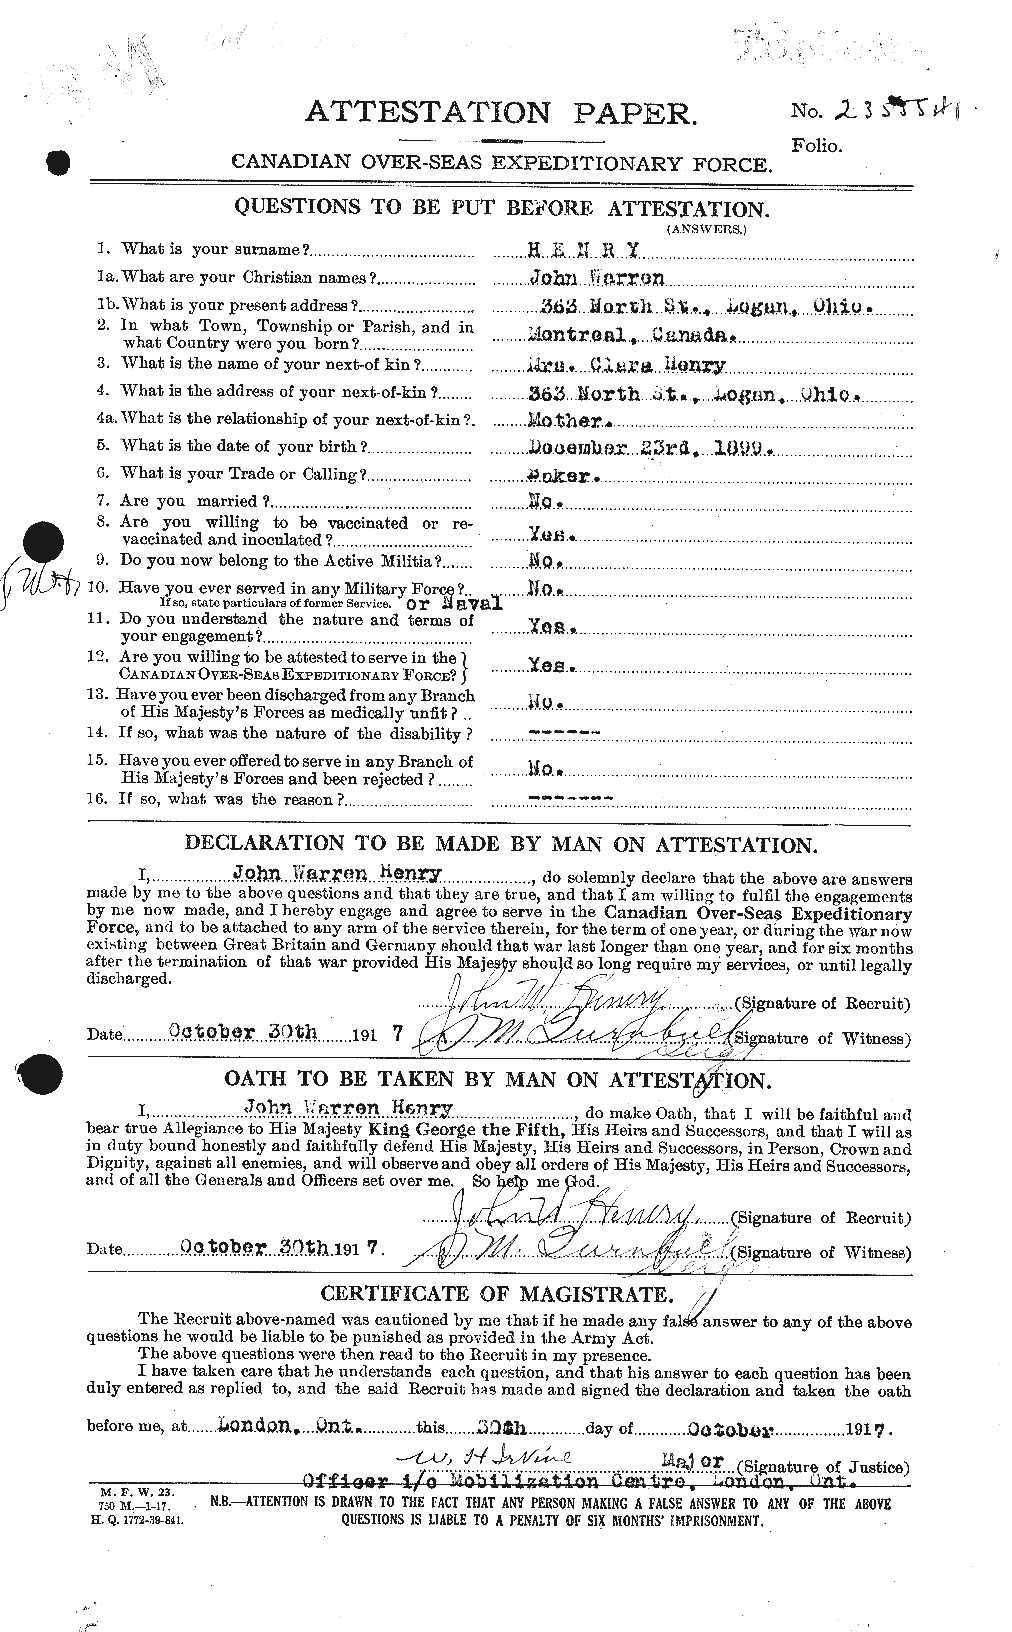 Personnel Records of the First World War - CEF 387638a